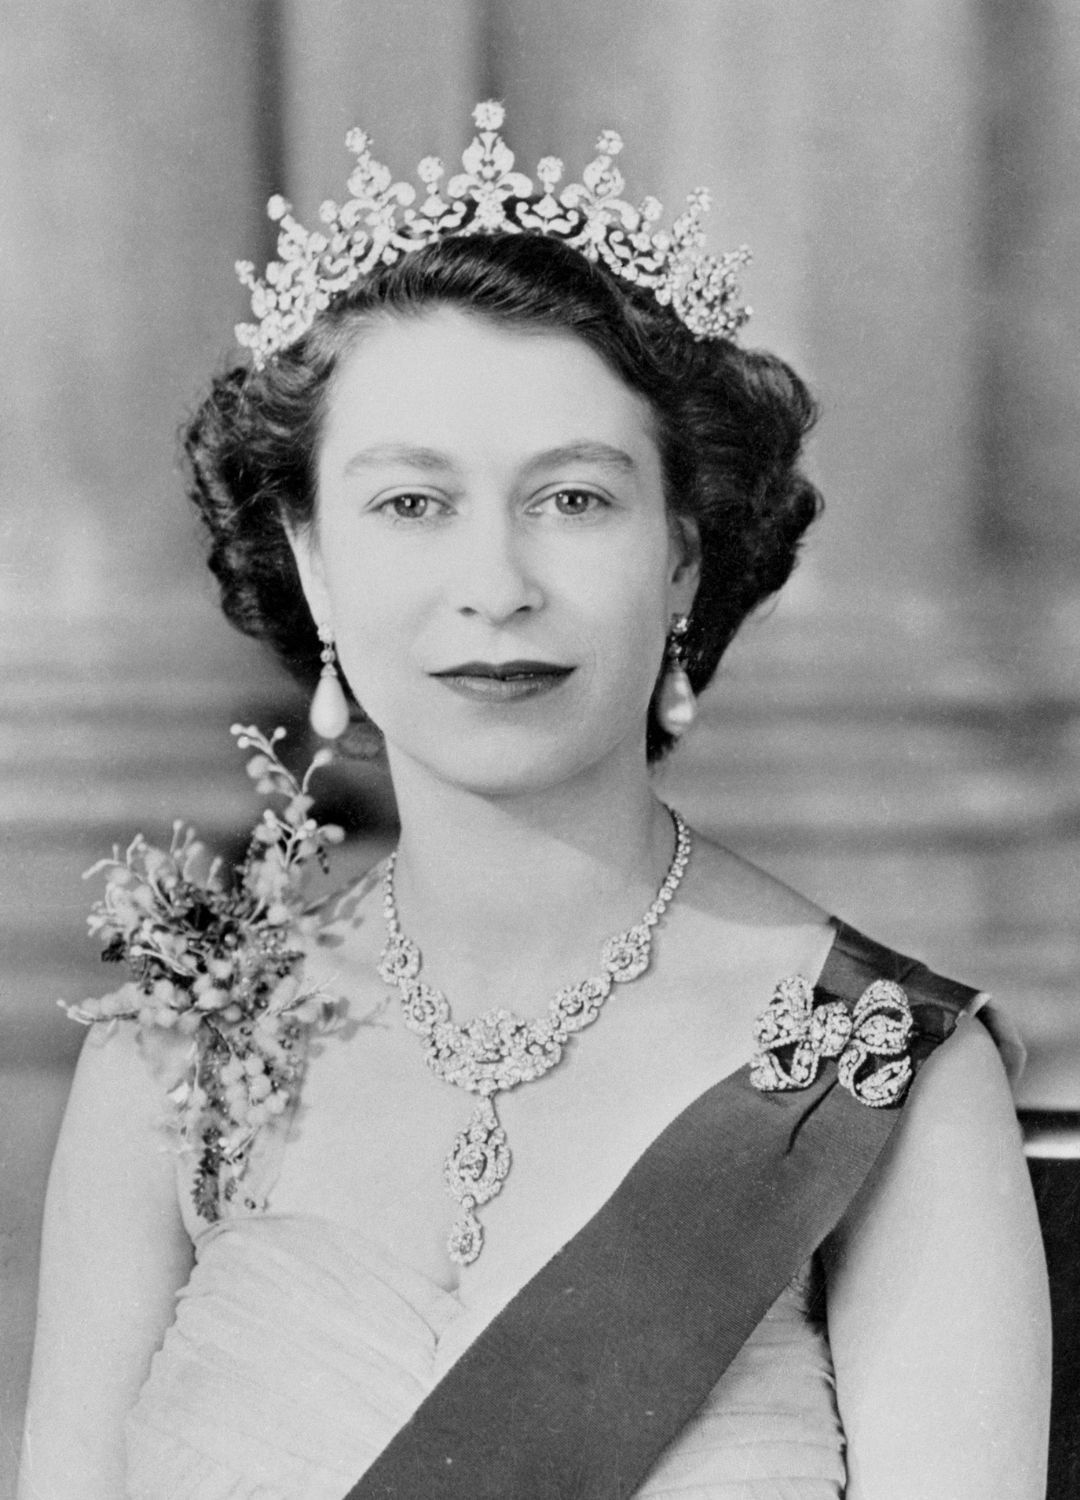 <p>                     Posing for a portrait alongside Prince Philip (not pictured here), Queen Elizabeth II wore her Blue Ribbon, Star of the Garter and the Girls of Great Britain and Ireland tiara that she received as a wedding present in 1947 from her grandmother. The portrait was taken shortly before the royal couple left for their six-month tour of the Commonwealth in 1954.                   </p>